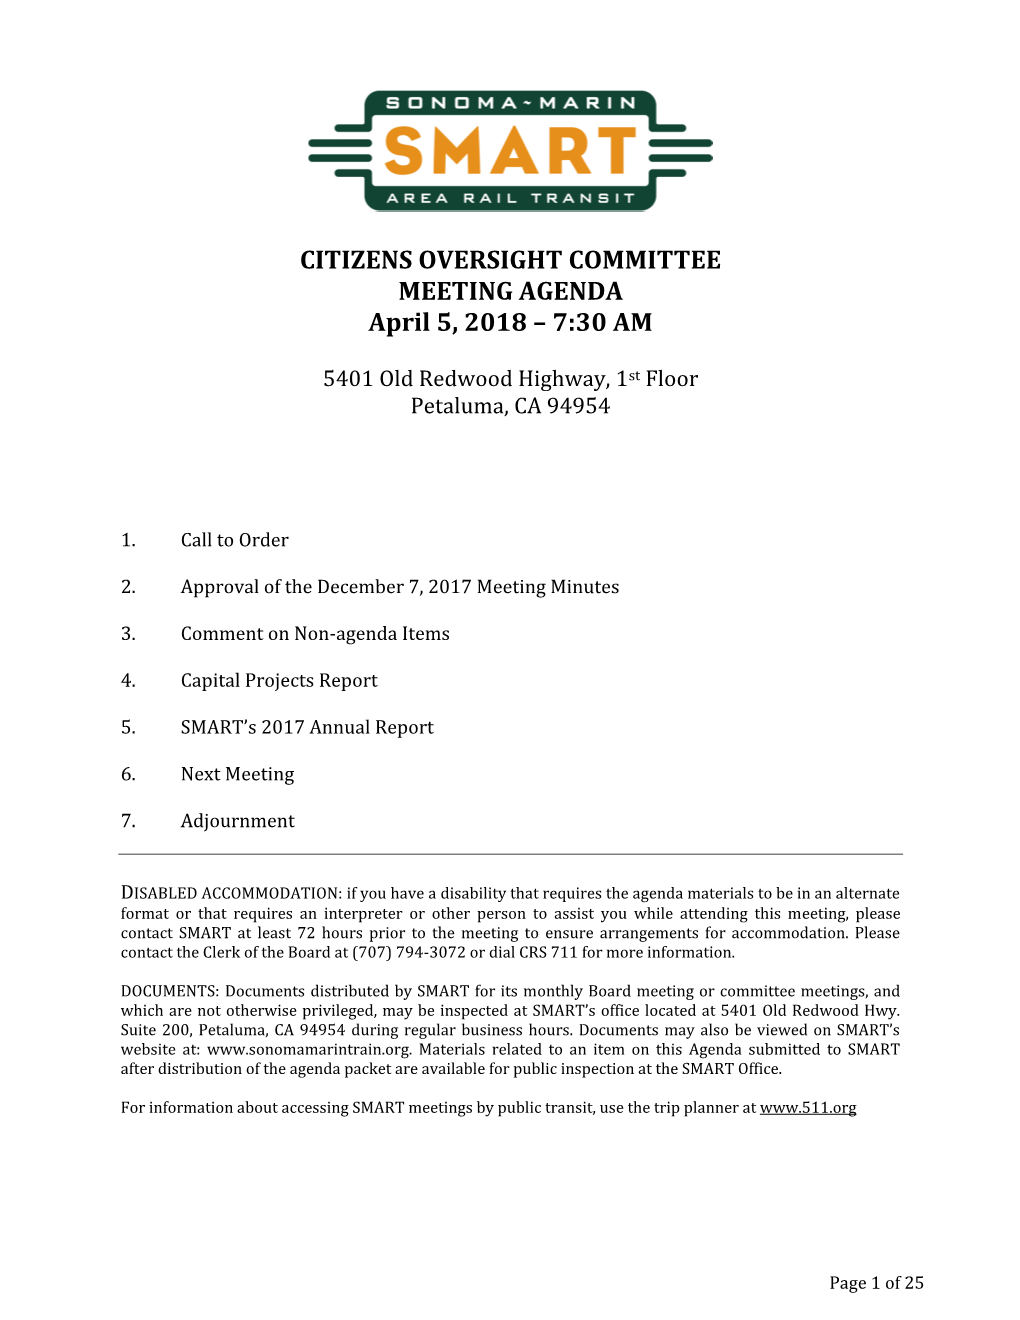 CITIZENS OVERSIGHT COMMITTEE MEETING AGENDA April 5, 2018 – 7:30 AM